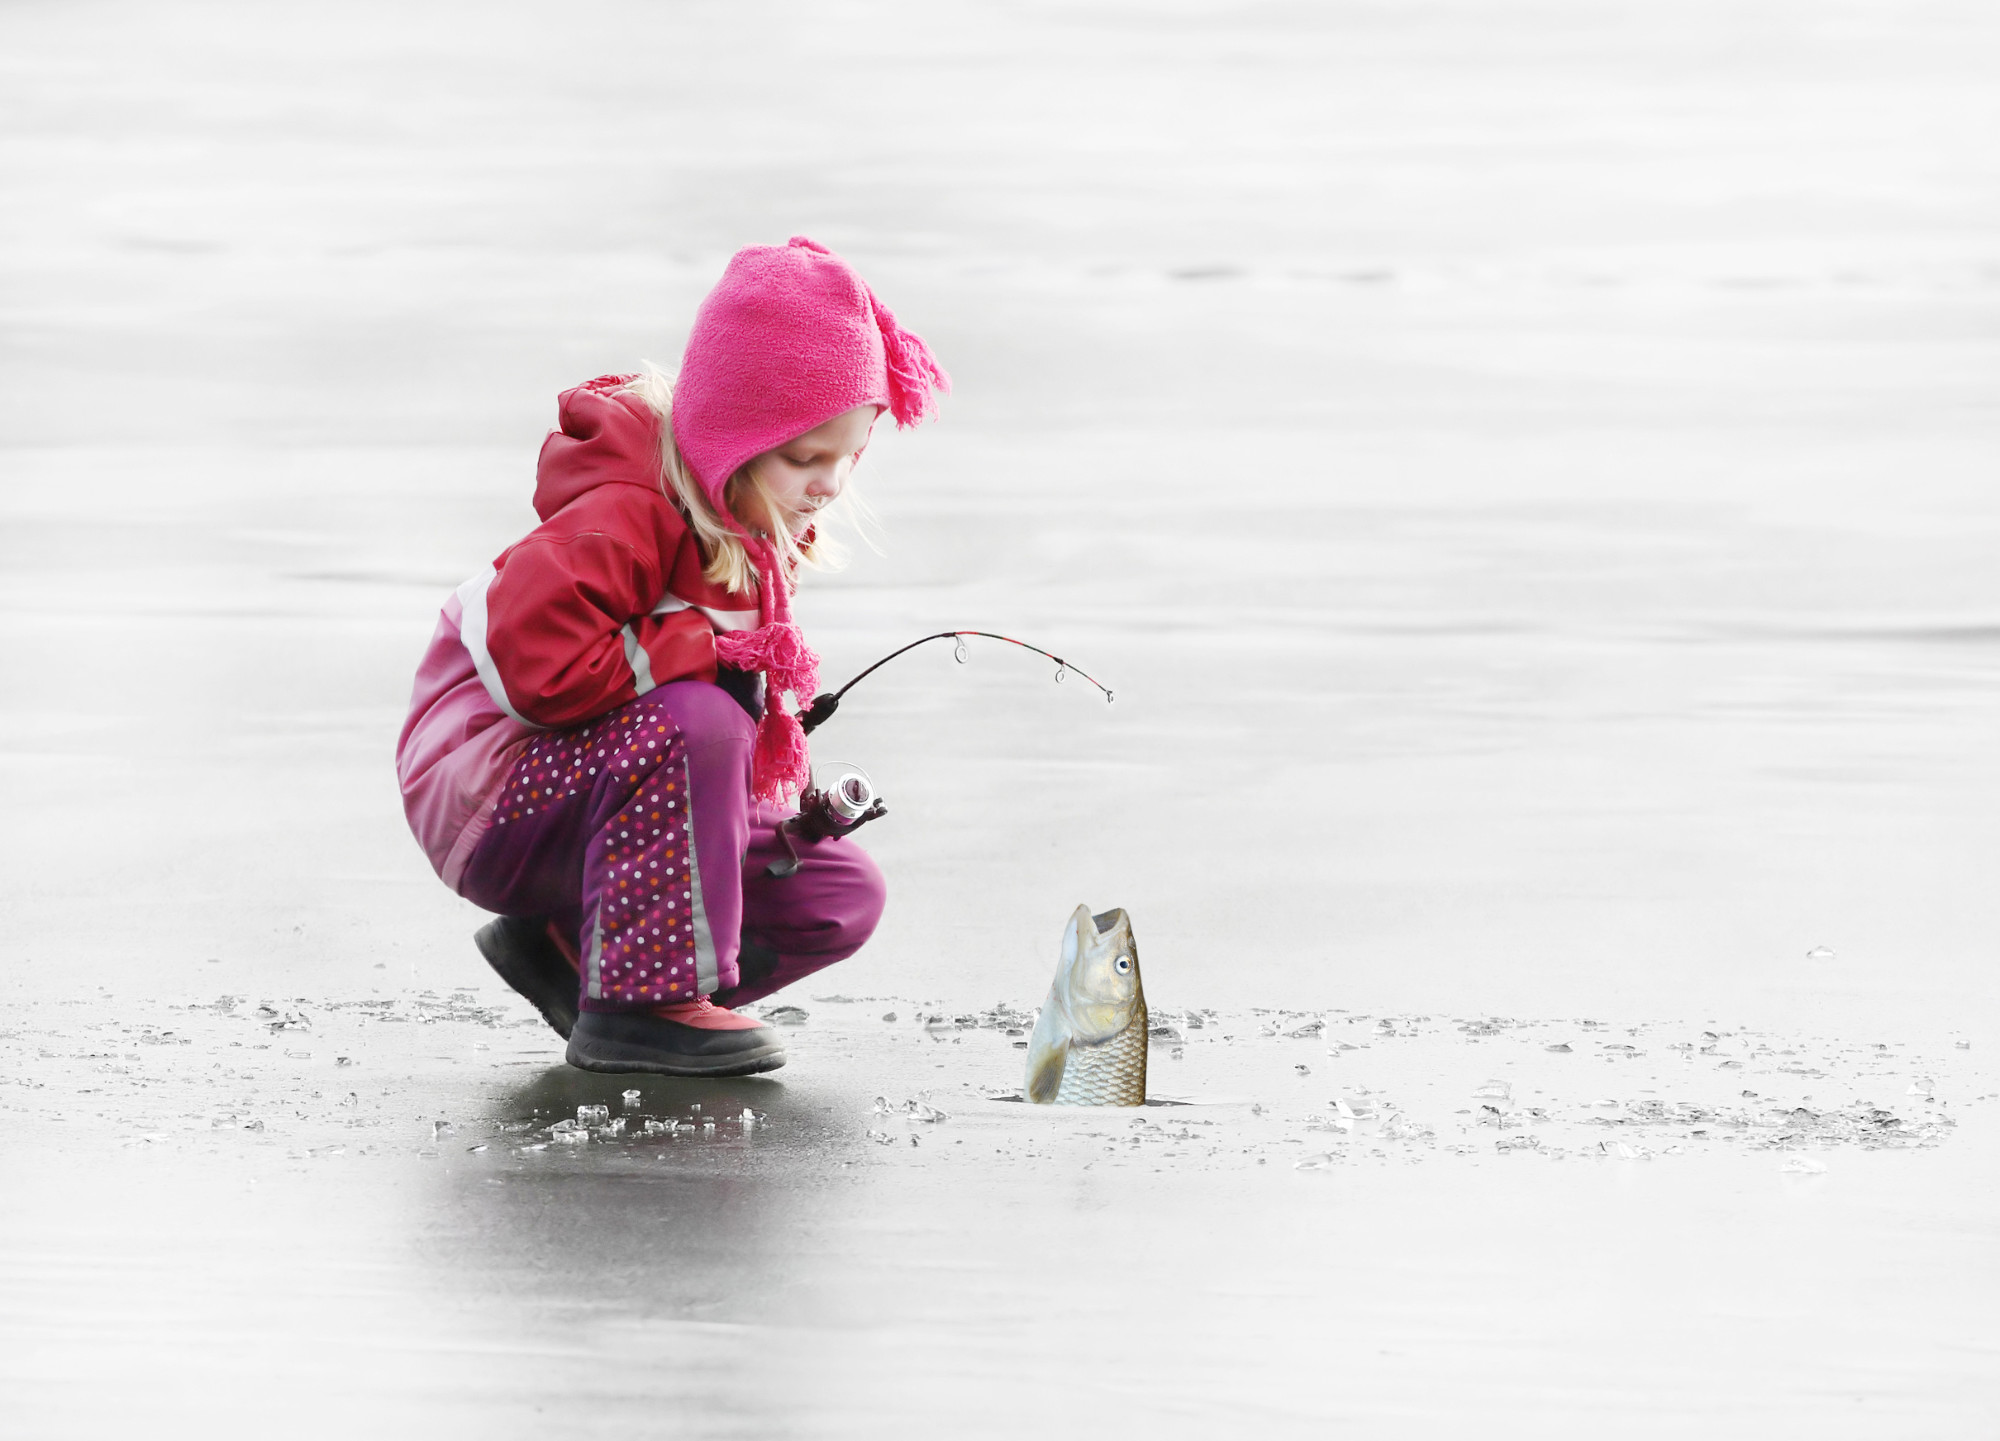 Free fishing this Family Day weekend should buoy your spirits - Barrie News